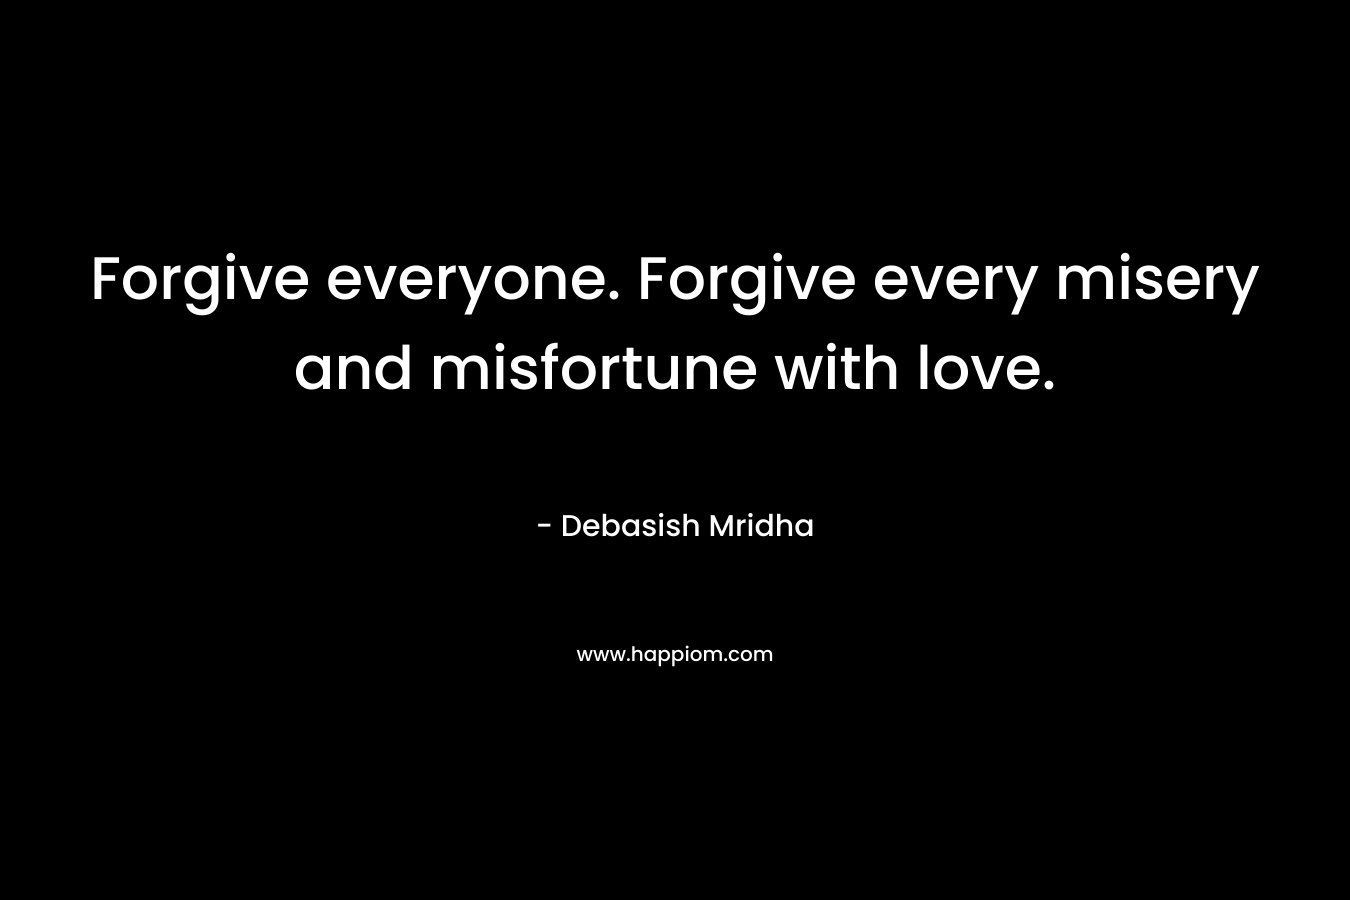 Forgive everyone. Forgive every misery and misfortune with love. – Debasish Mridha